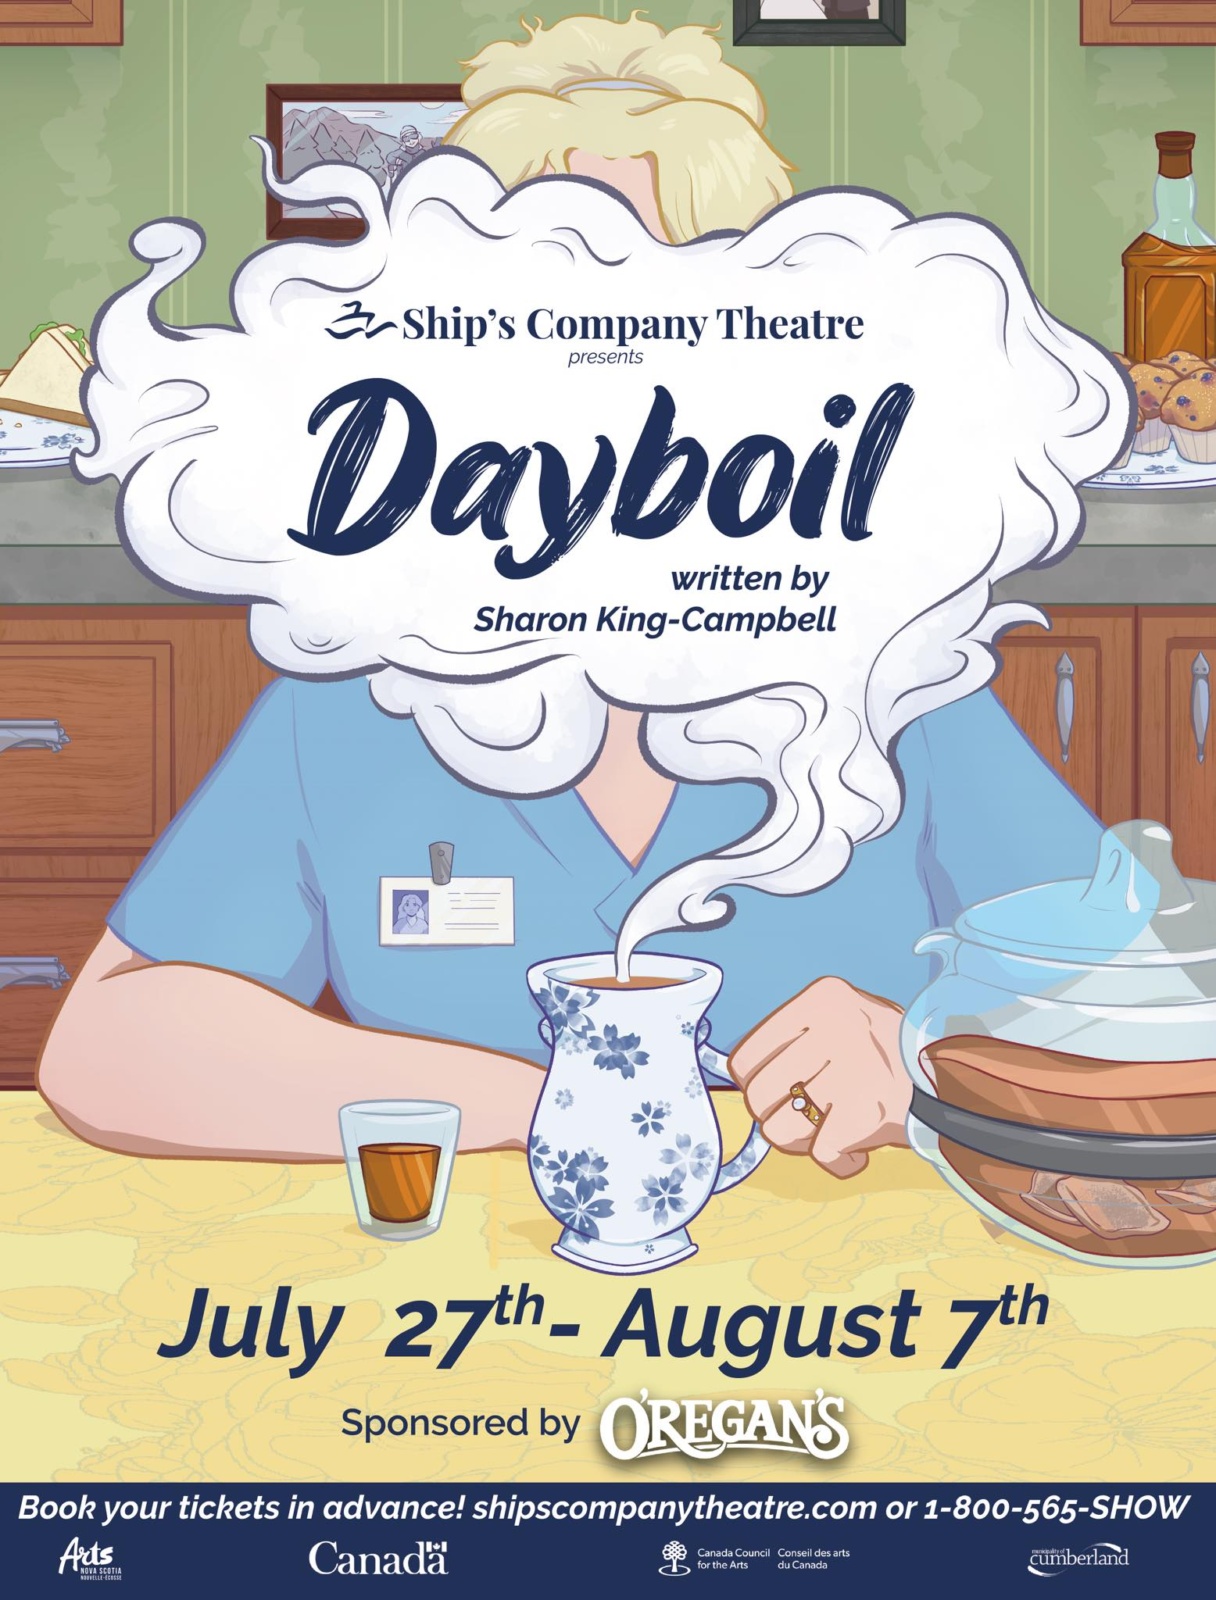 An illustration of a woman sitting at a table with a cup of hot tea and a shot glass. Her face is obscured by the steam from the tea, upon which is the text "Ship's Company Theatre presents Dayboil written by Sharon King-Campbell." Below, it reads "July 27th-August 7th; Book your tickets in advance! shipscompanytheatre.com or 1-800-565-SHOW." A series of sponsor logos runs across the bottom of the poster: O'Regan's, Arts Nova Scotia, Government of Canada, Canada Council for the Arts, & Municipality of Cumberland. 